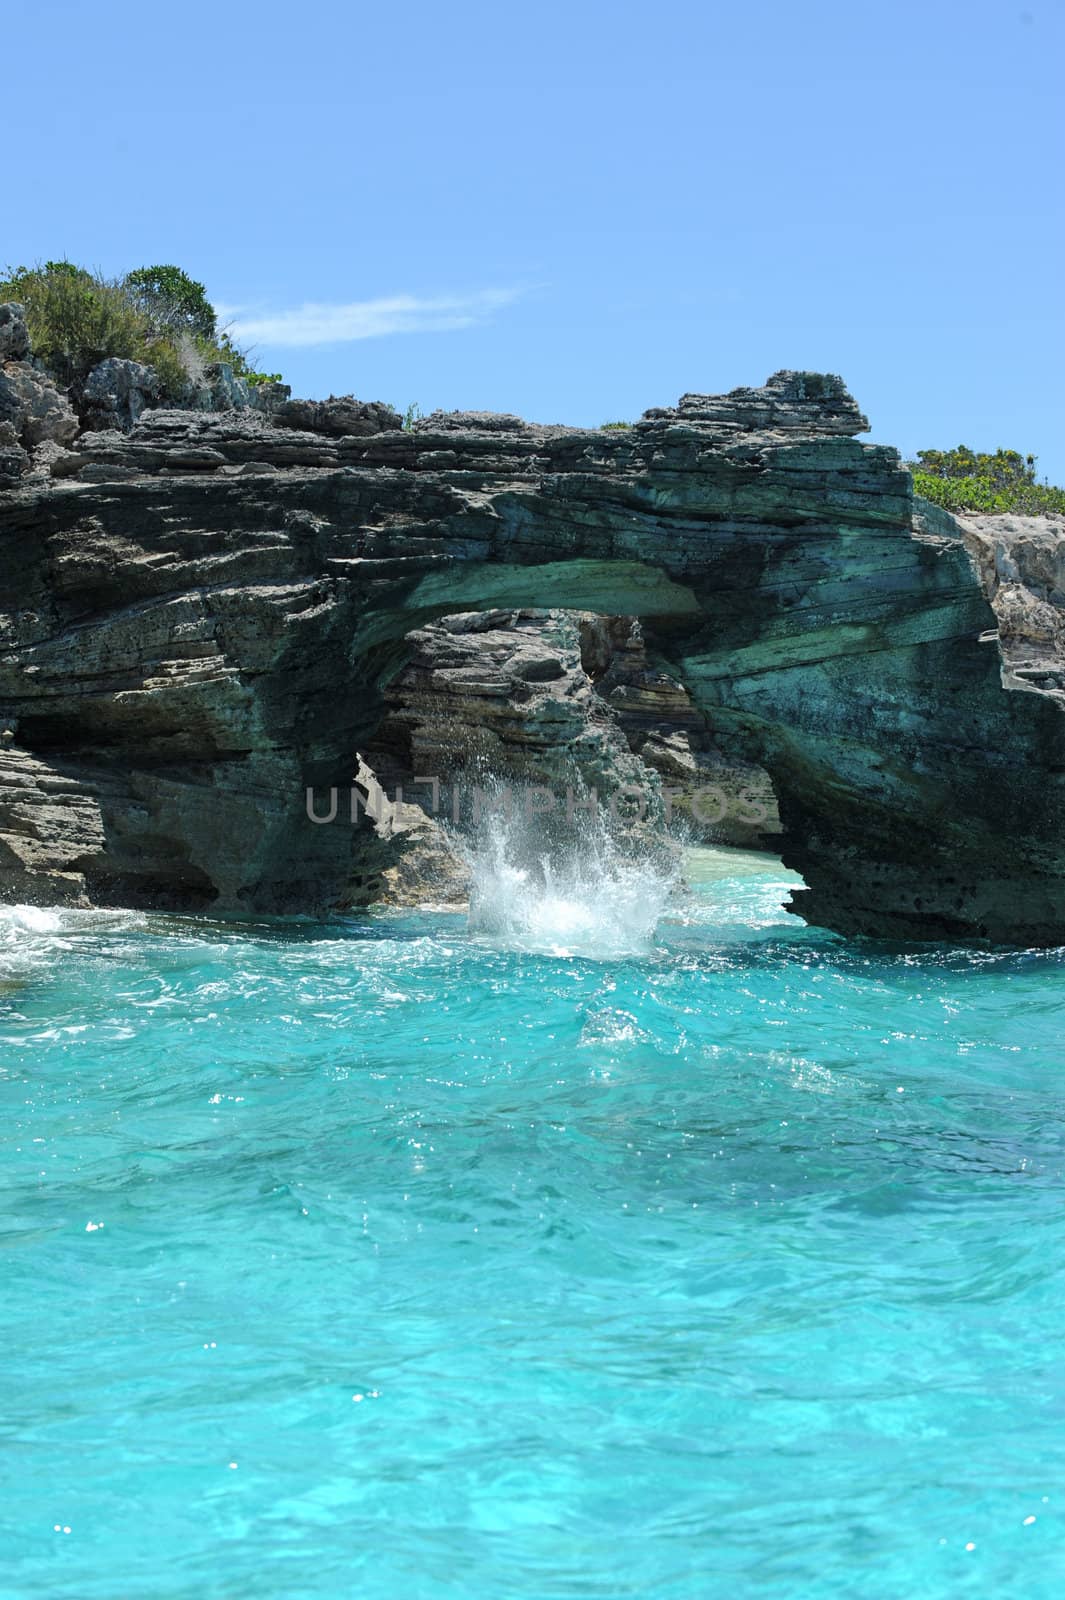 Blue water and rocks in scenic tropical setting by ftlaudgirl